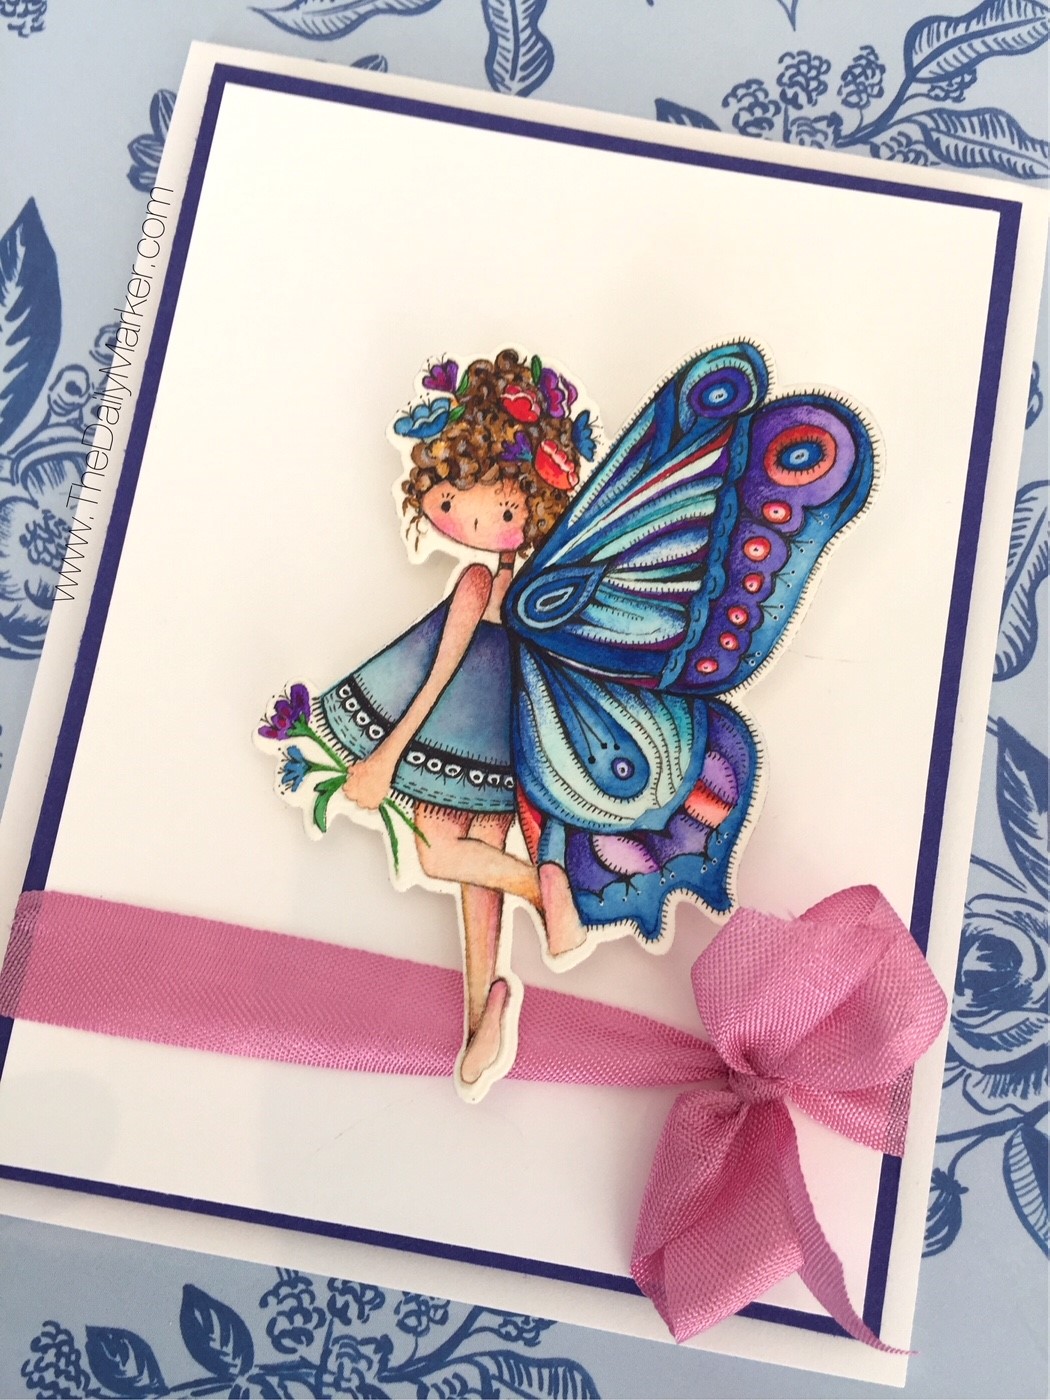 www.stampingbella.com: rubber stamp used: Tiny Townie Butterfly Girl BRIANNA card by Kathy Racoosin